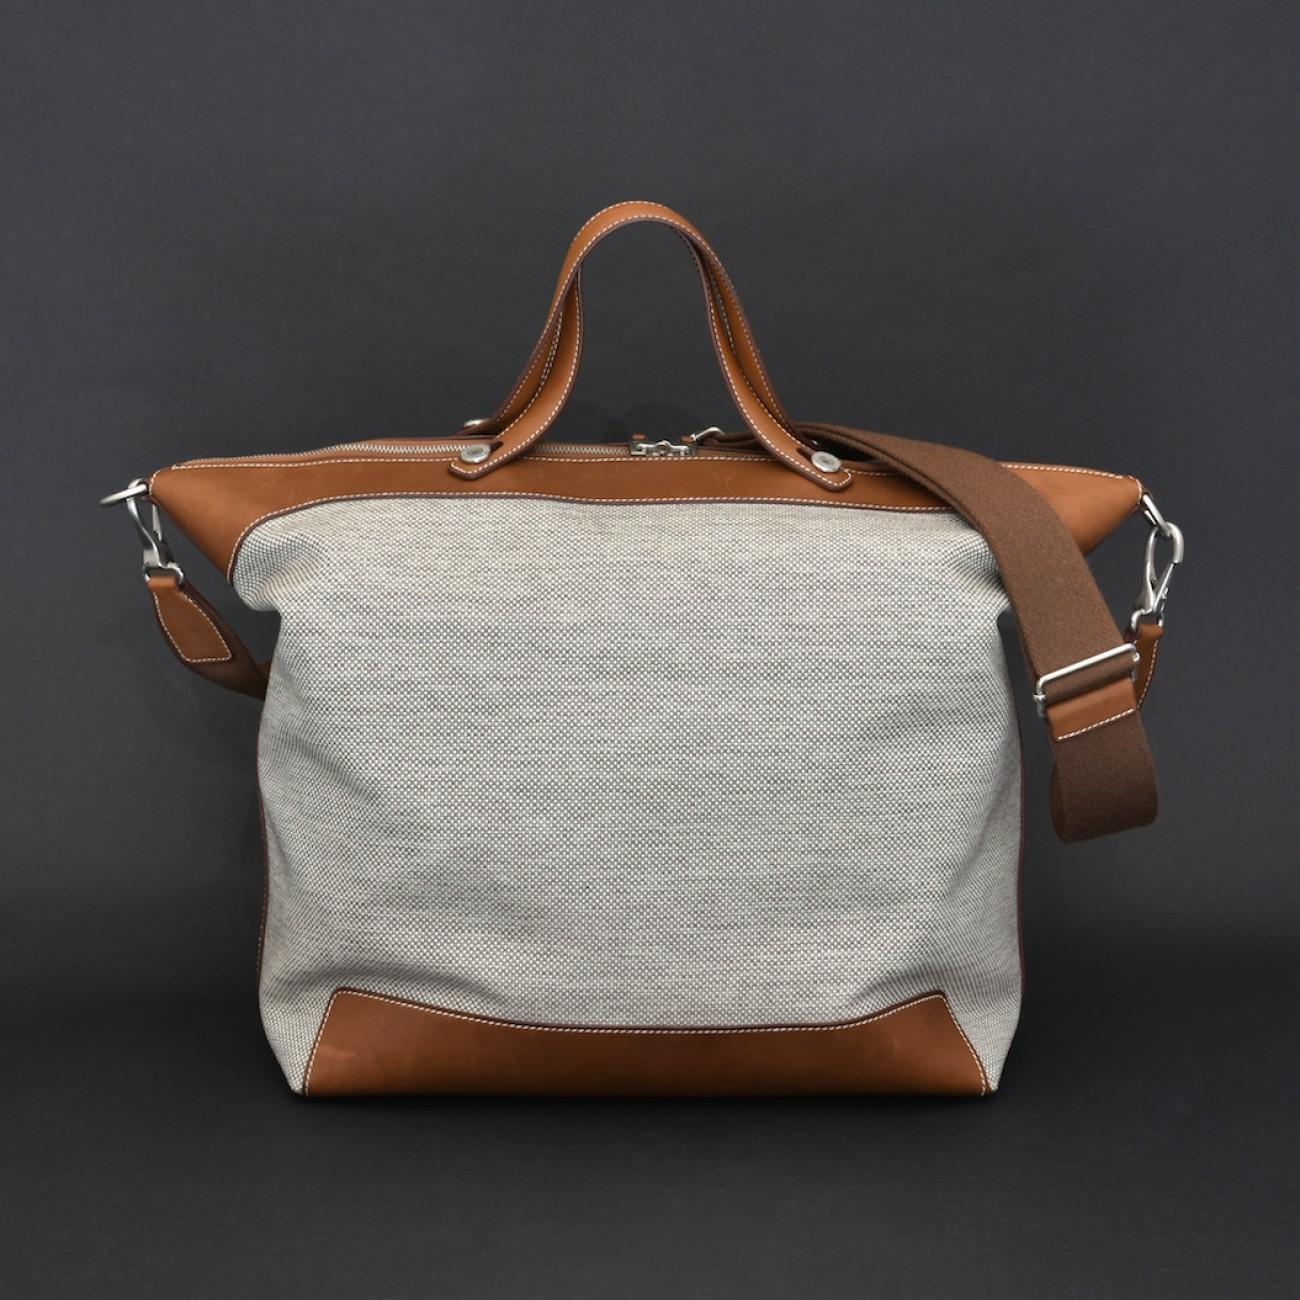 A modern travel bag by Hermès in barely used condition. Constructed from water & stain resistant 'H-tech' ecru canvas and fawn berenia calfskin leather with brushed silver and palladium hardware. The bag has a detachable shoulder strap, flat top